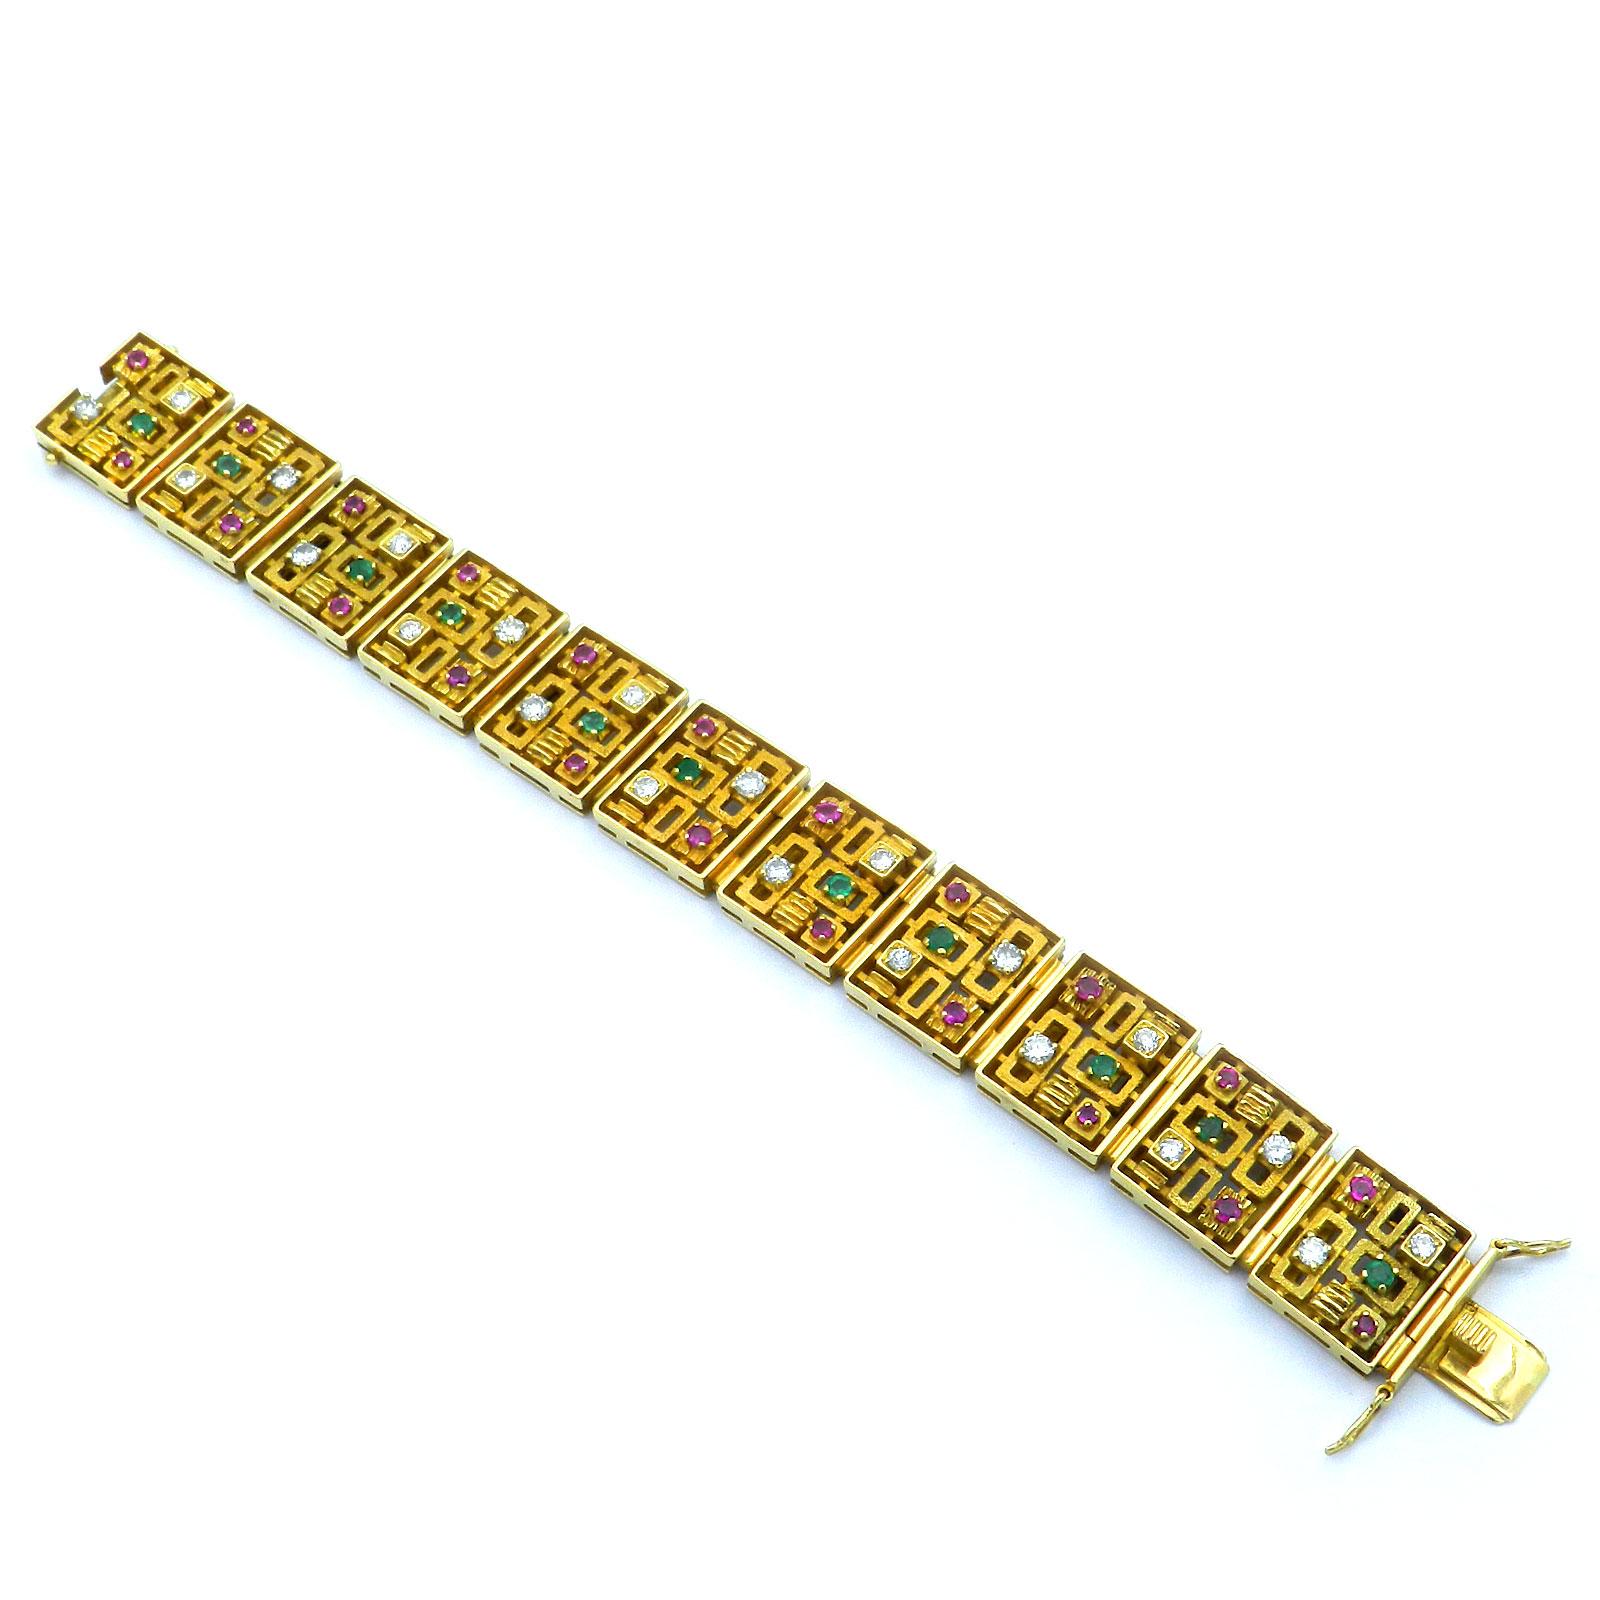 Modernist 1.9 Carat Diamond Ruby and Emerald 18K Gold Bracelet Meran 1970

Decorative gold bracelet with multi colored gemstones in intrecate workmanship, the rectangular links with a structured surface, geometrically openwork and set with rubies,